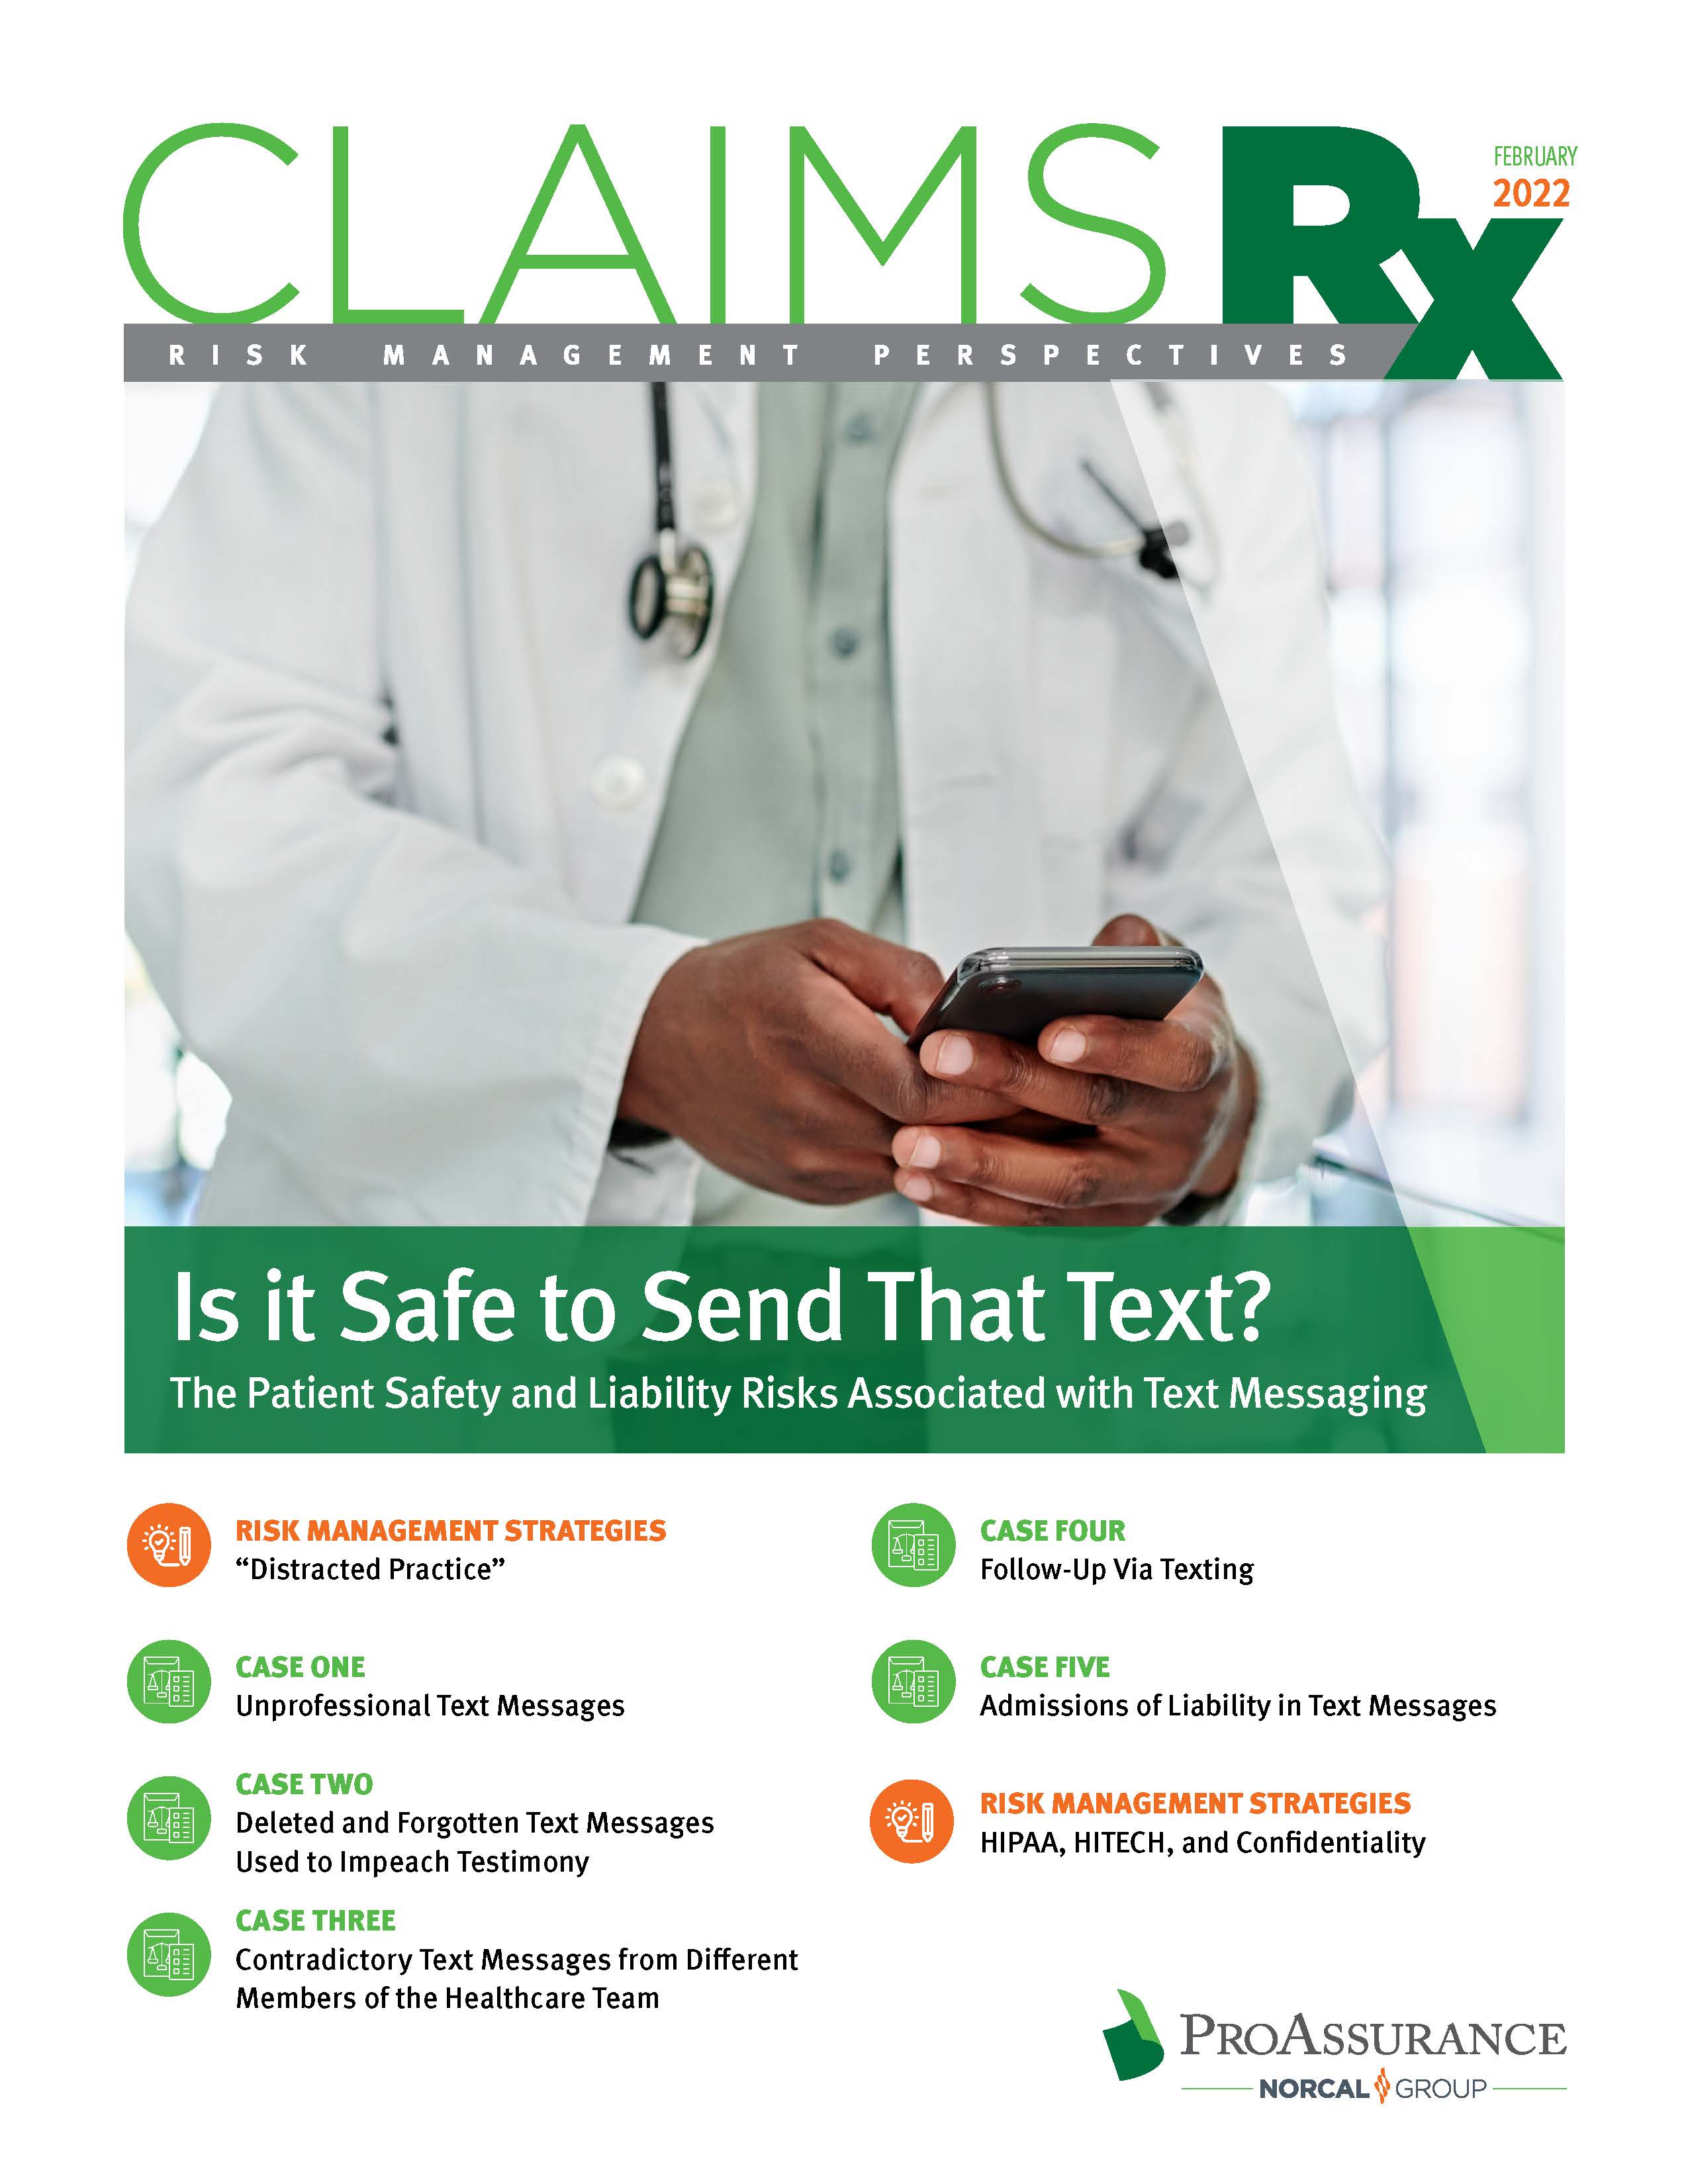 February 2020 Claims Rx